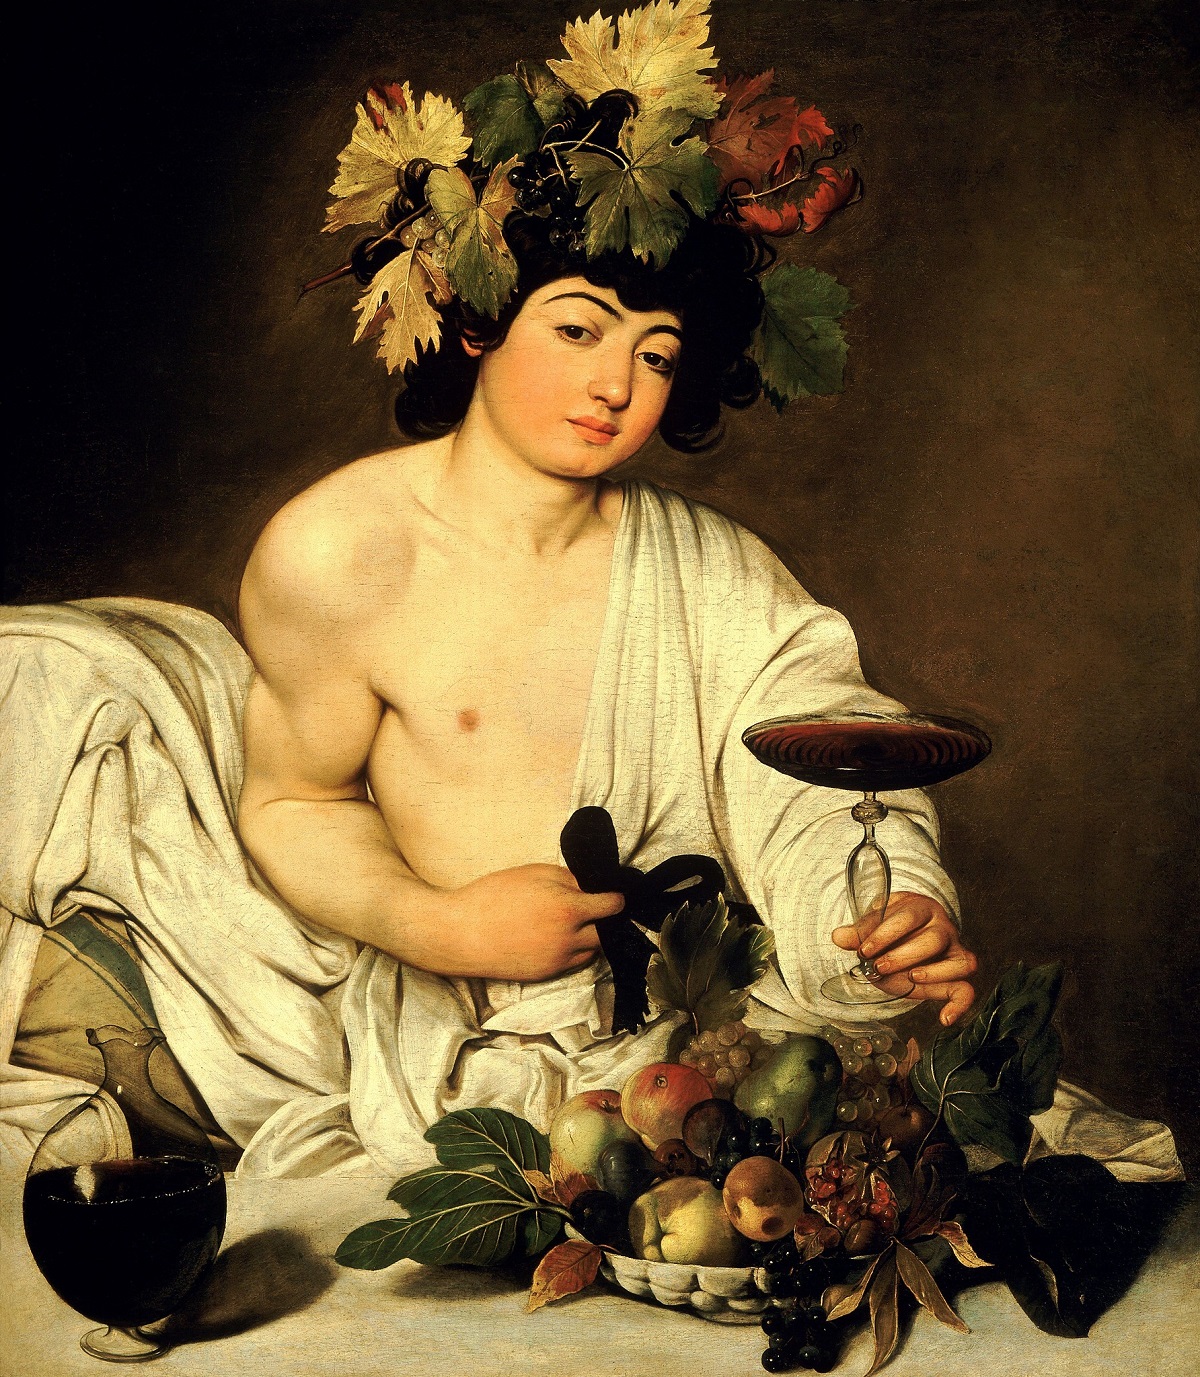 A painting of a pale man with a large wine glass